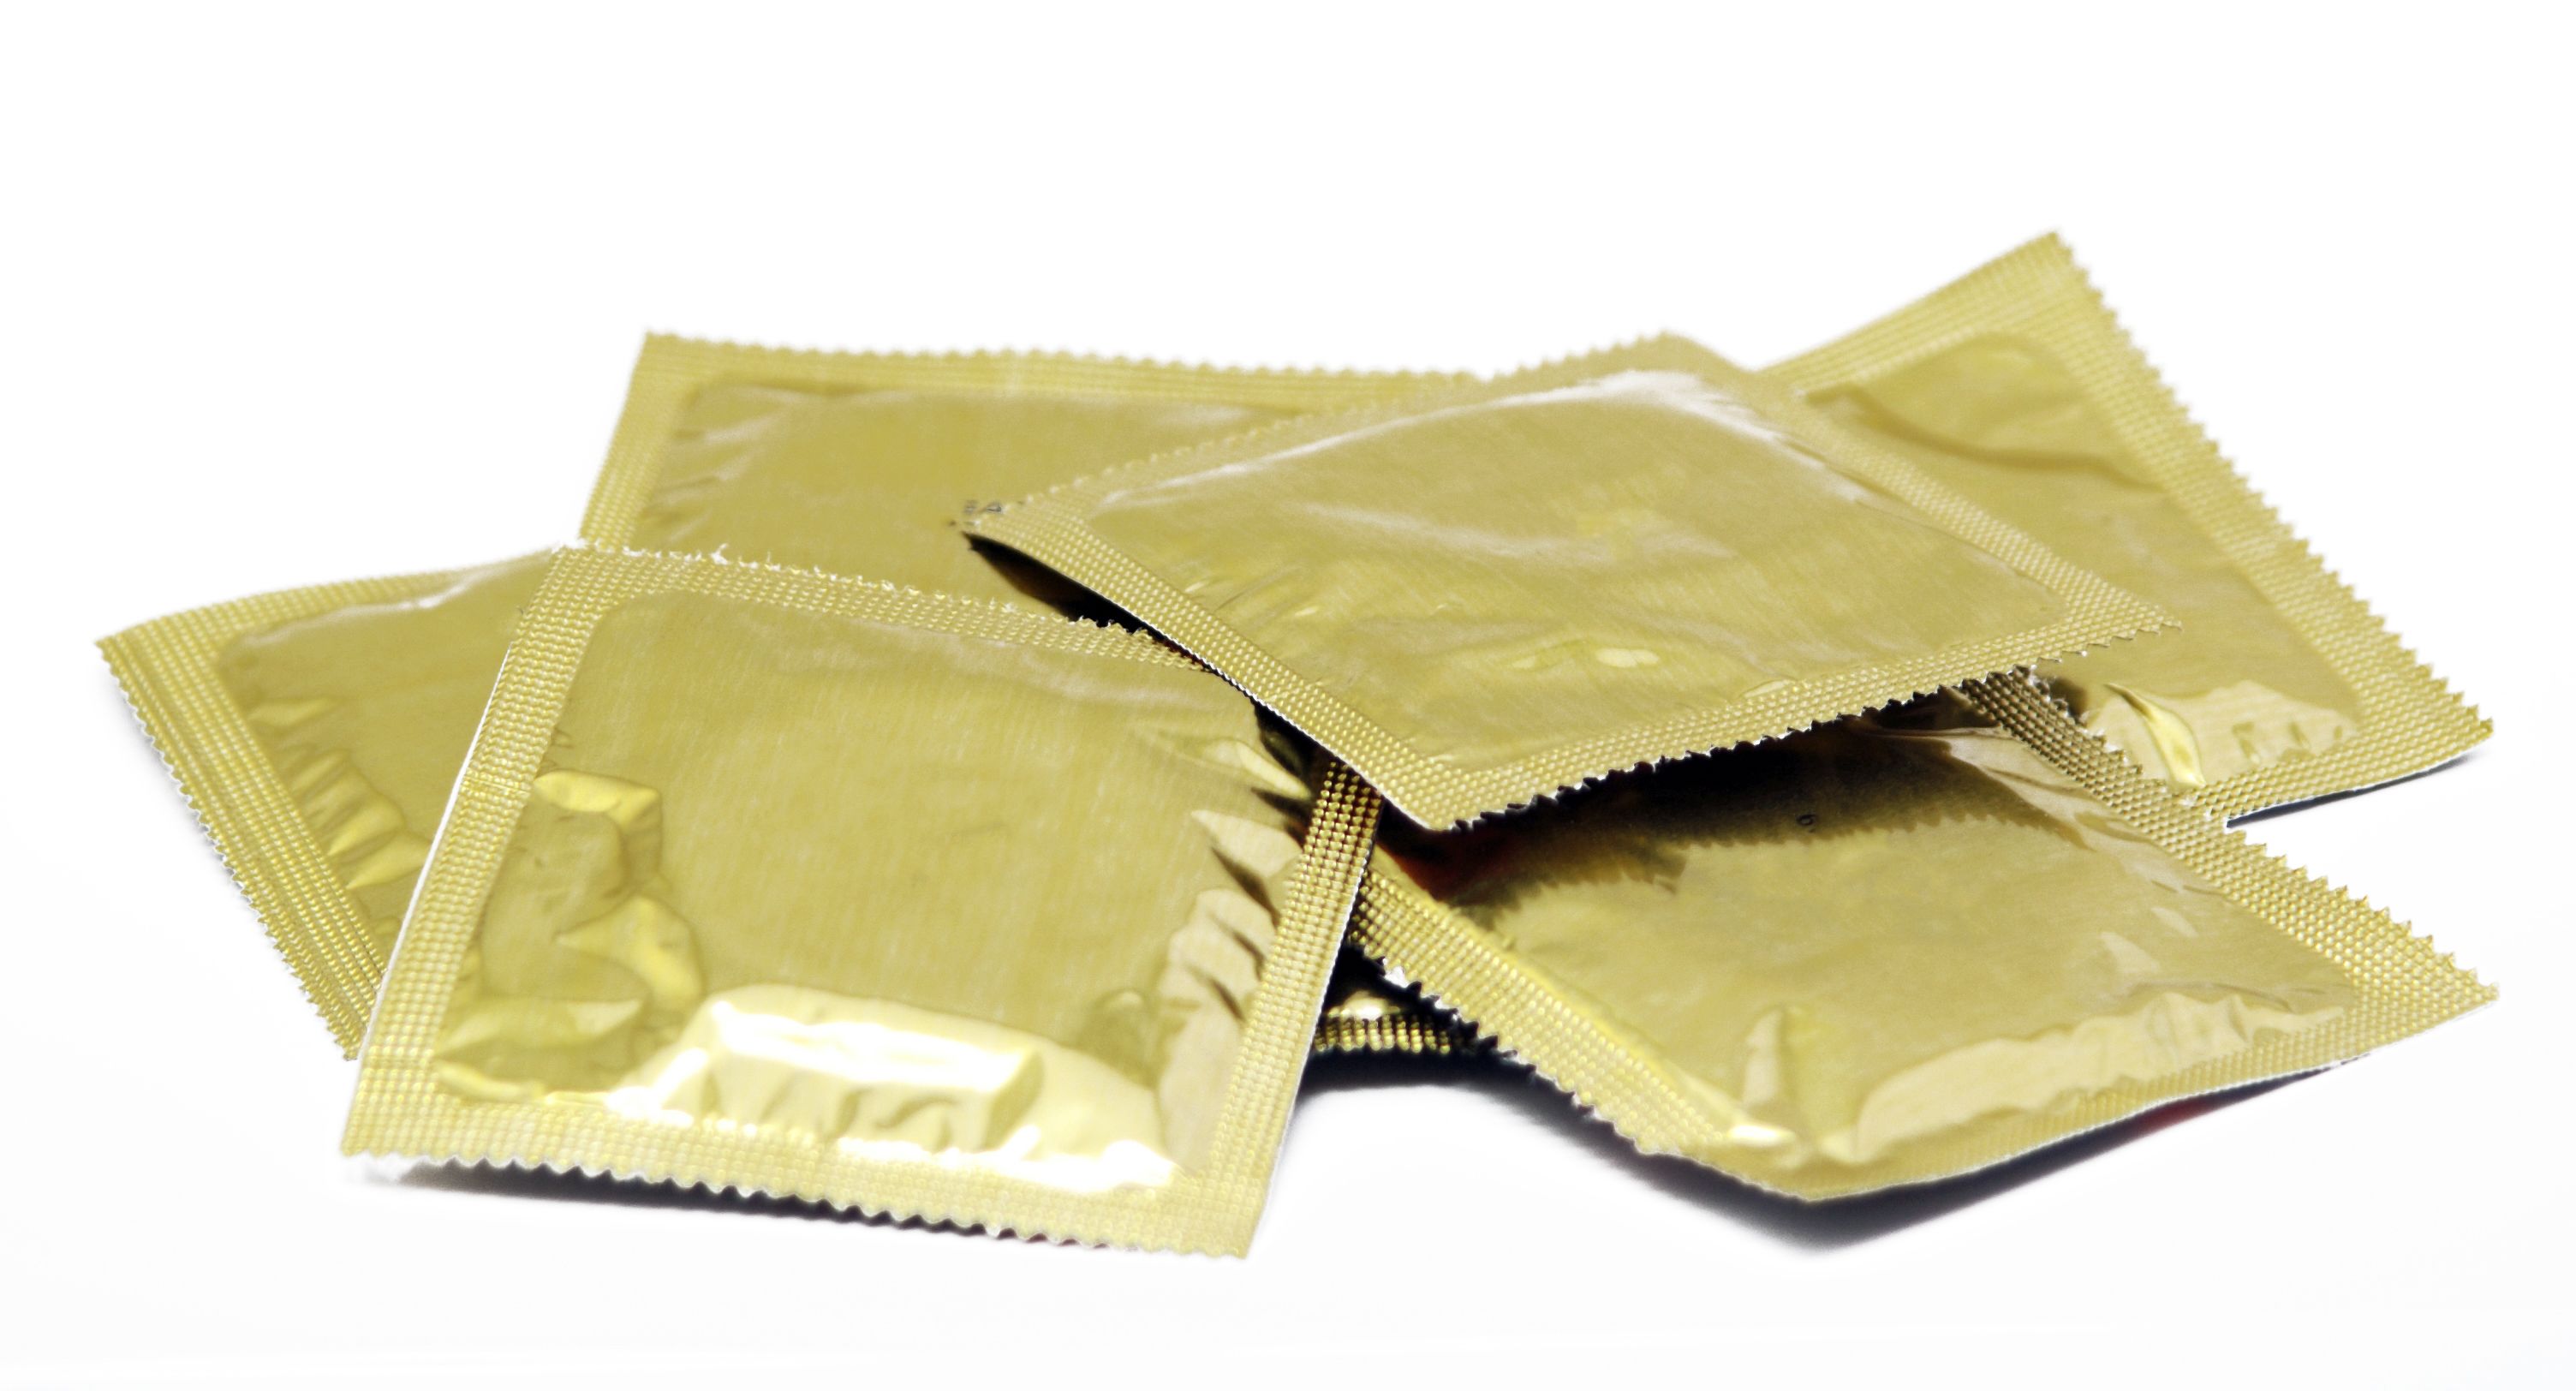 Yes, there are people who wash and reuse condoms. And the CDC wants them to stop | CNN